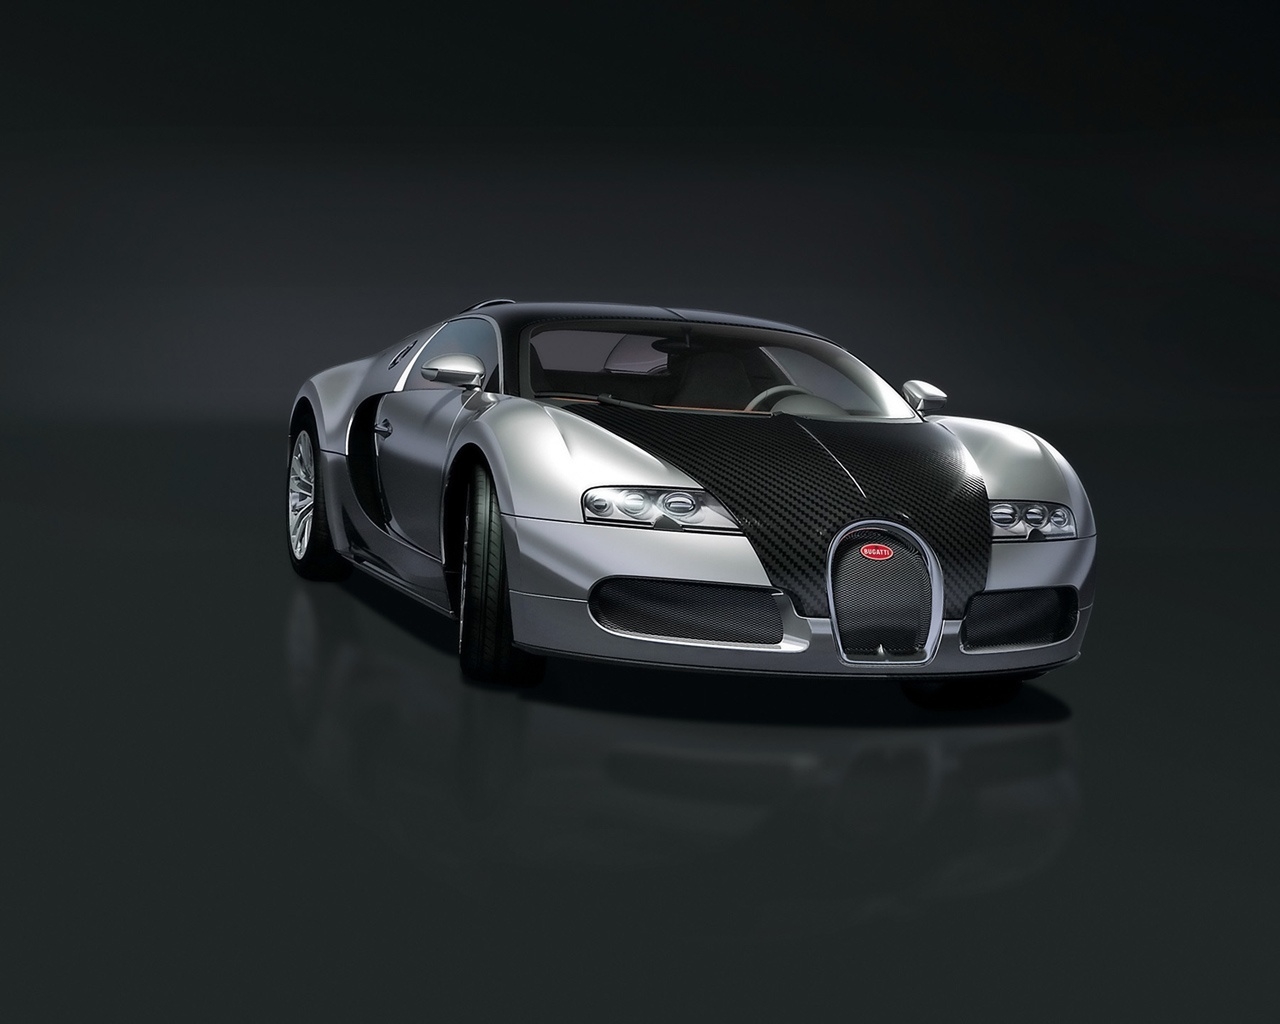 Bugatti EB 16.4 Veyron Pur Sang 2008 - Front Angle for 1280 x 1024 resolution